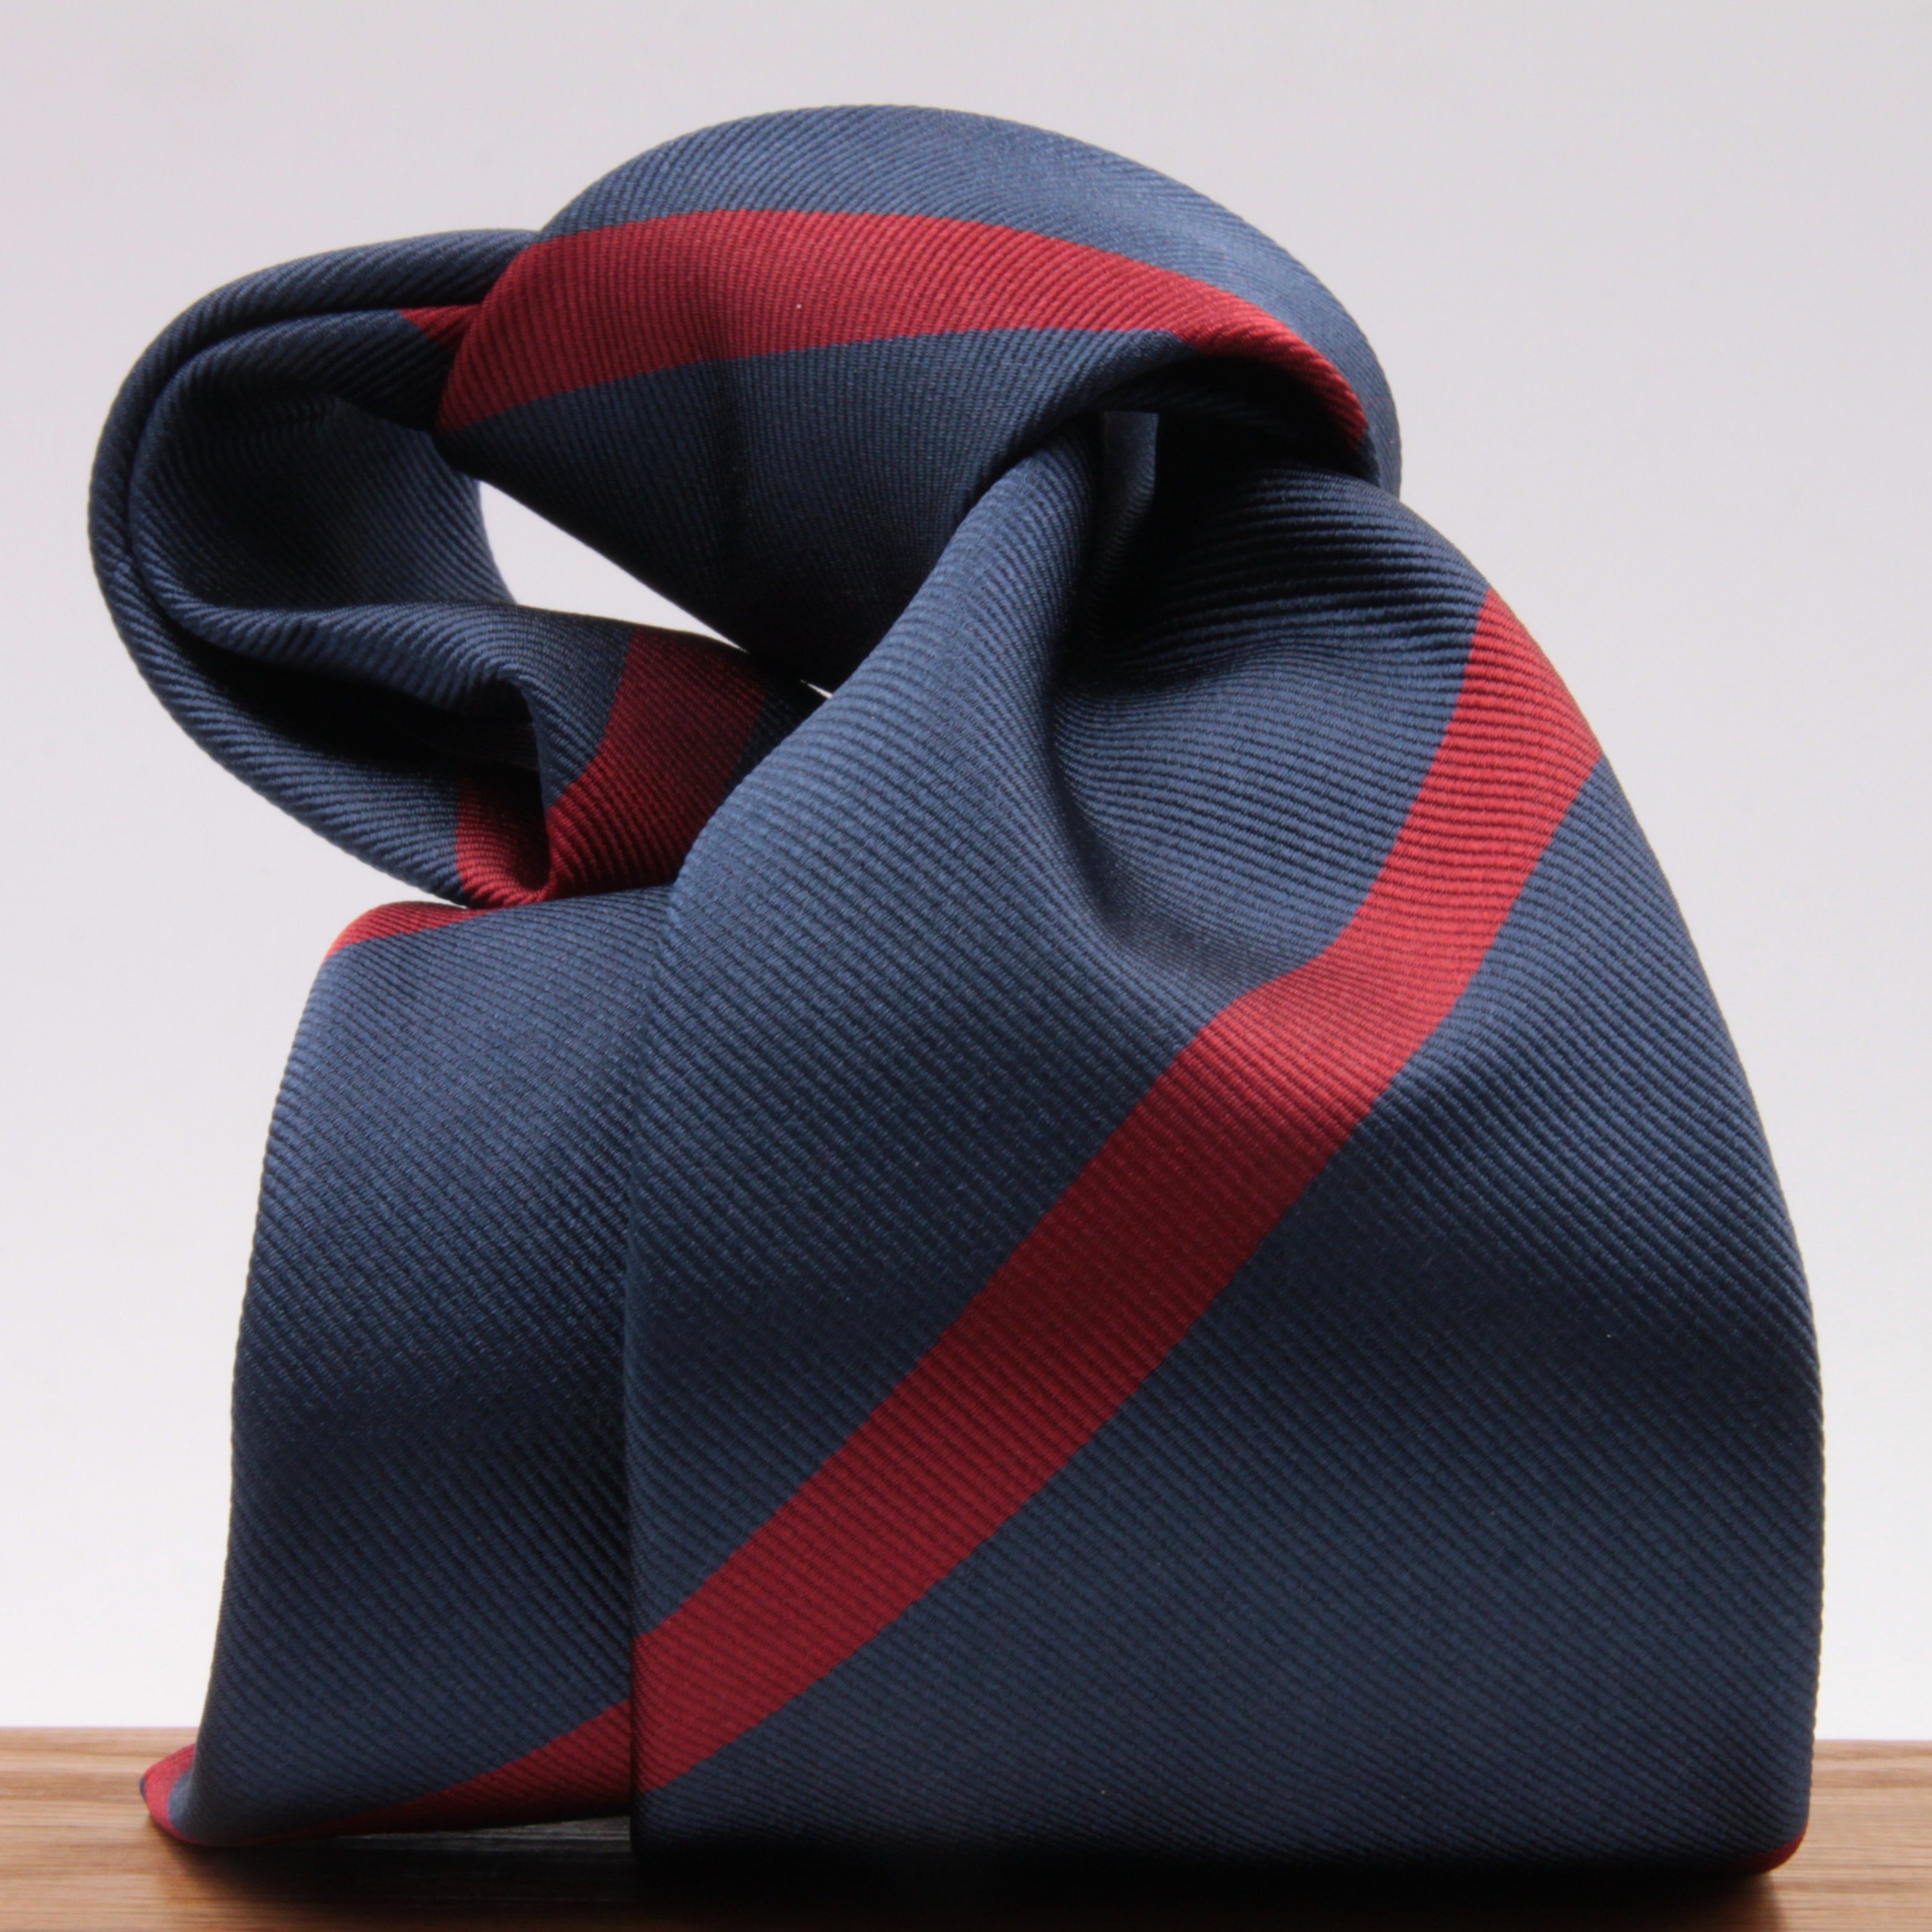 Holliday & Brown for Cruciani & Bella 100% Silk Jacquard  Regimental "Lincolnshire Regiment" Blue and Red stripes tie Handmade in Italy 8 cm x 150 cm #5437